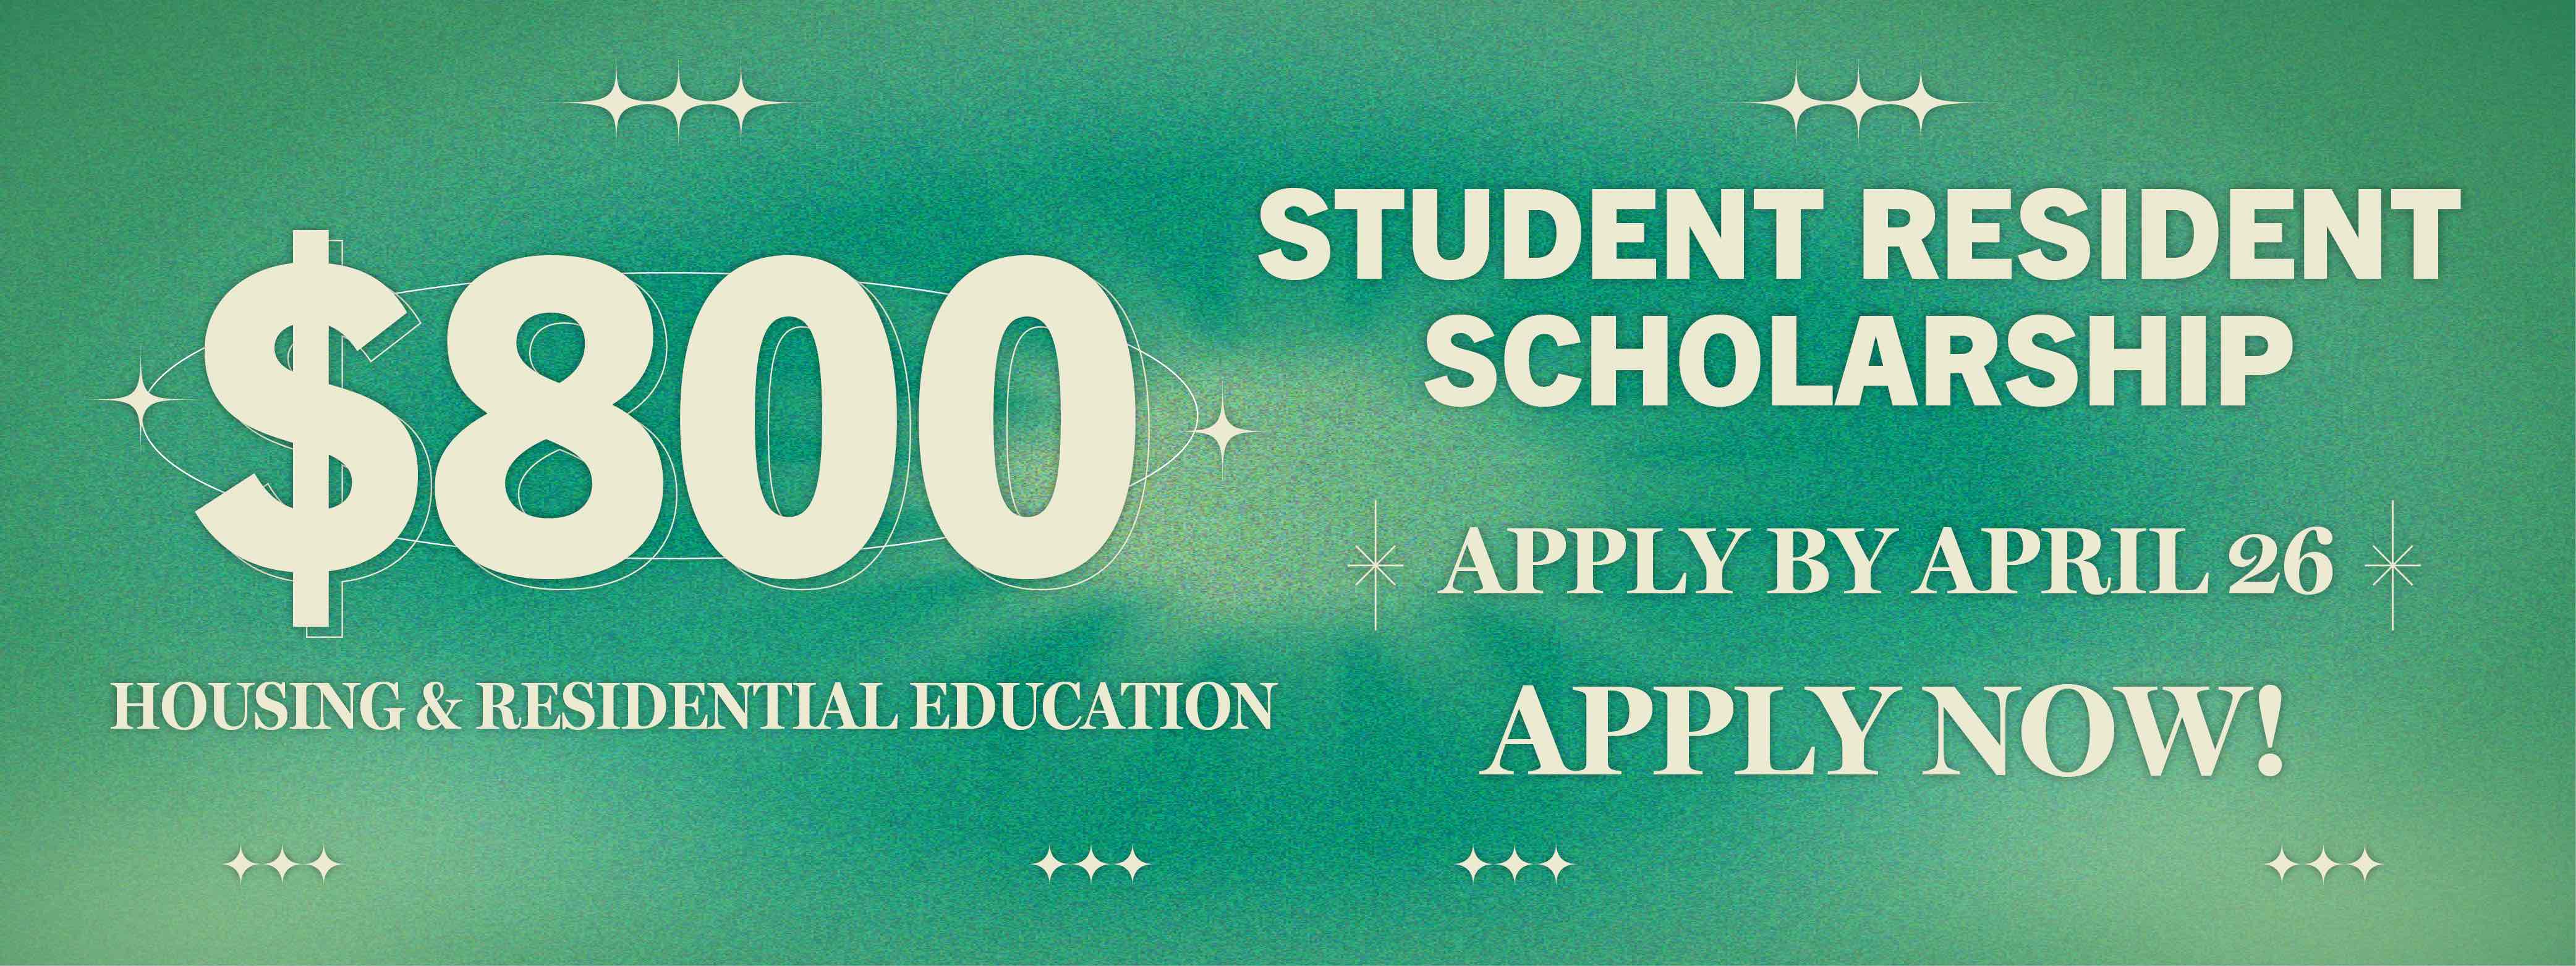 Apply Today for the Student Resident Scholarship!